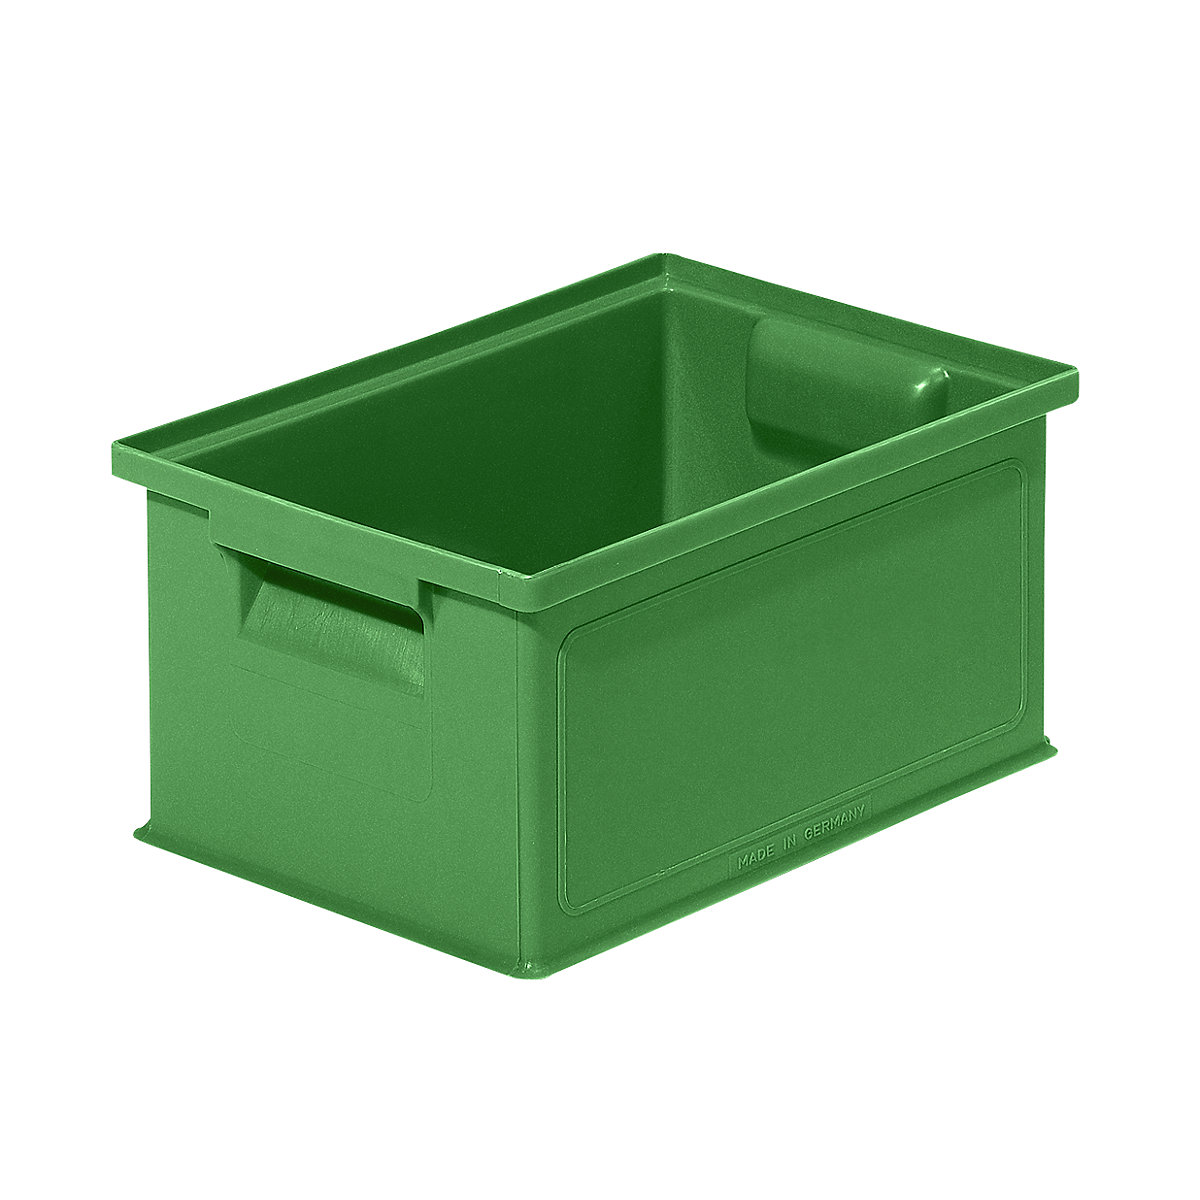 Stacking transport box, LxWxH 310 x 210 x 145 mm, colour green, pack of 20-3